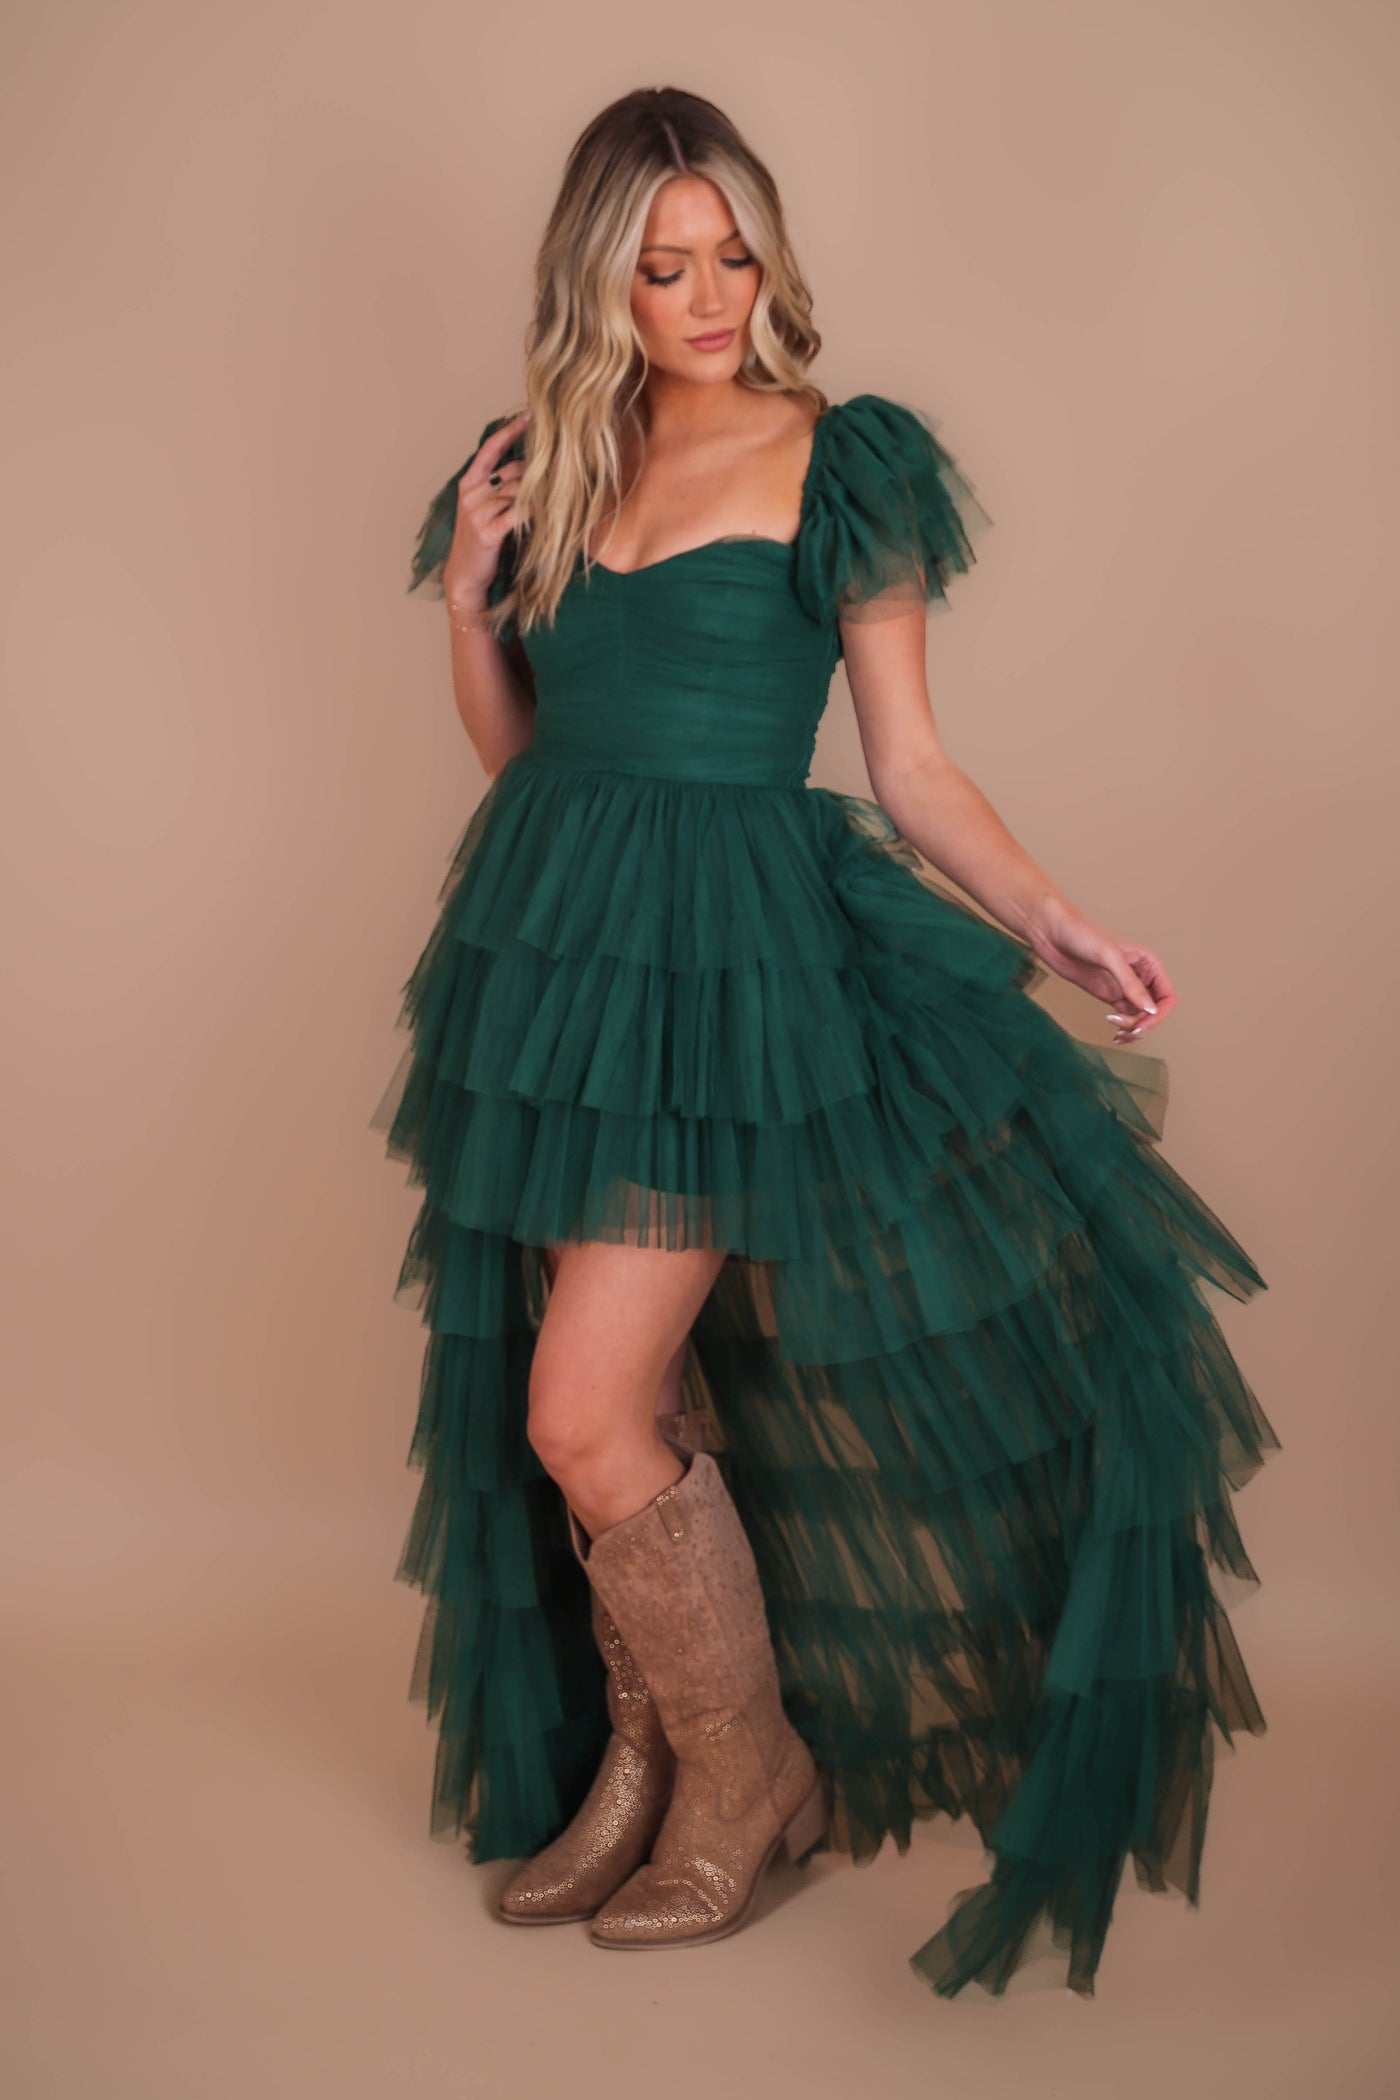 Women's Tulle Gown- Women's Green Tulle Maxi Dress- Luxxel Tulle Off The Shoulder Maxi 